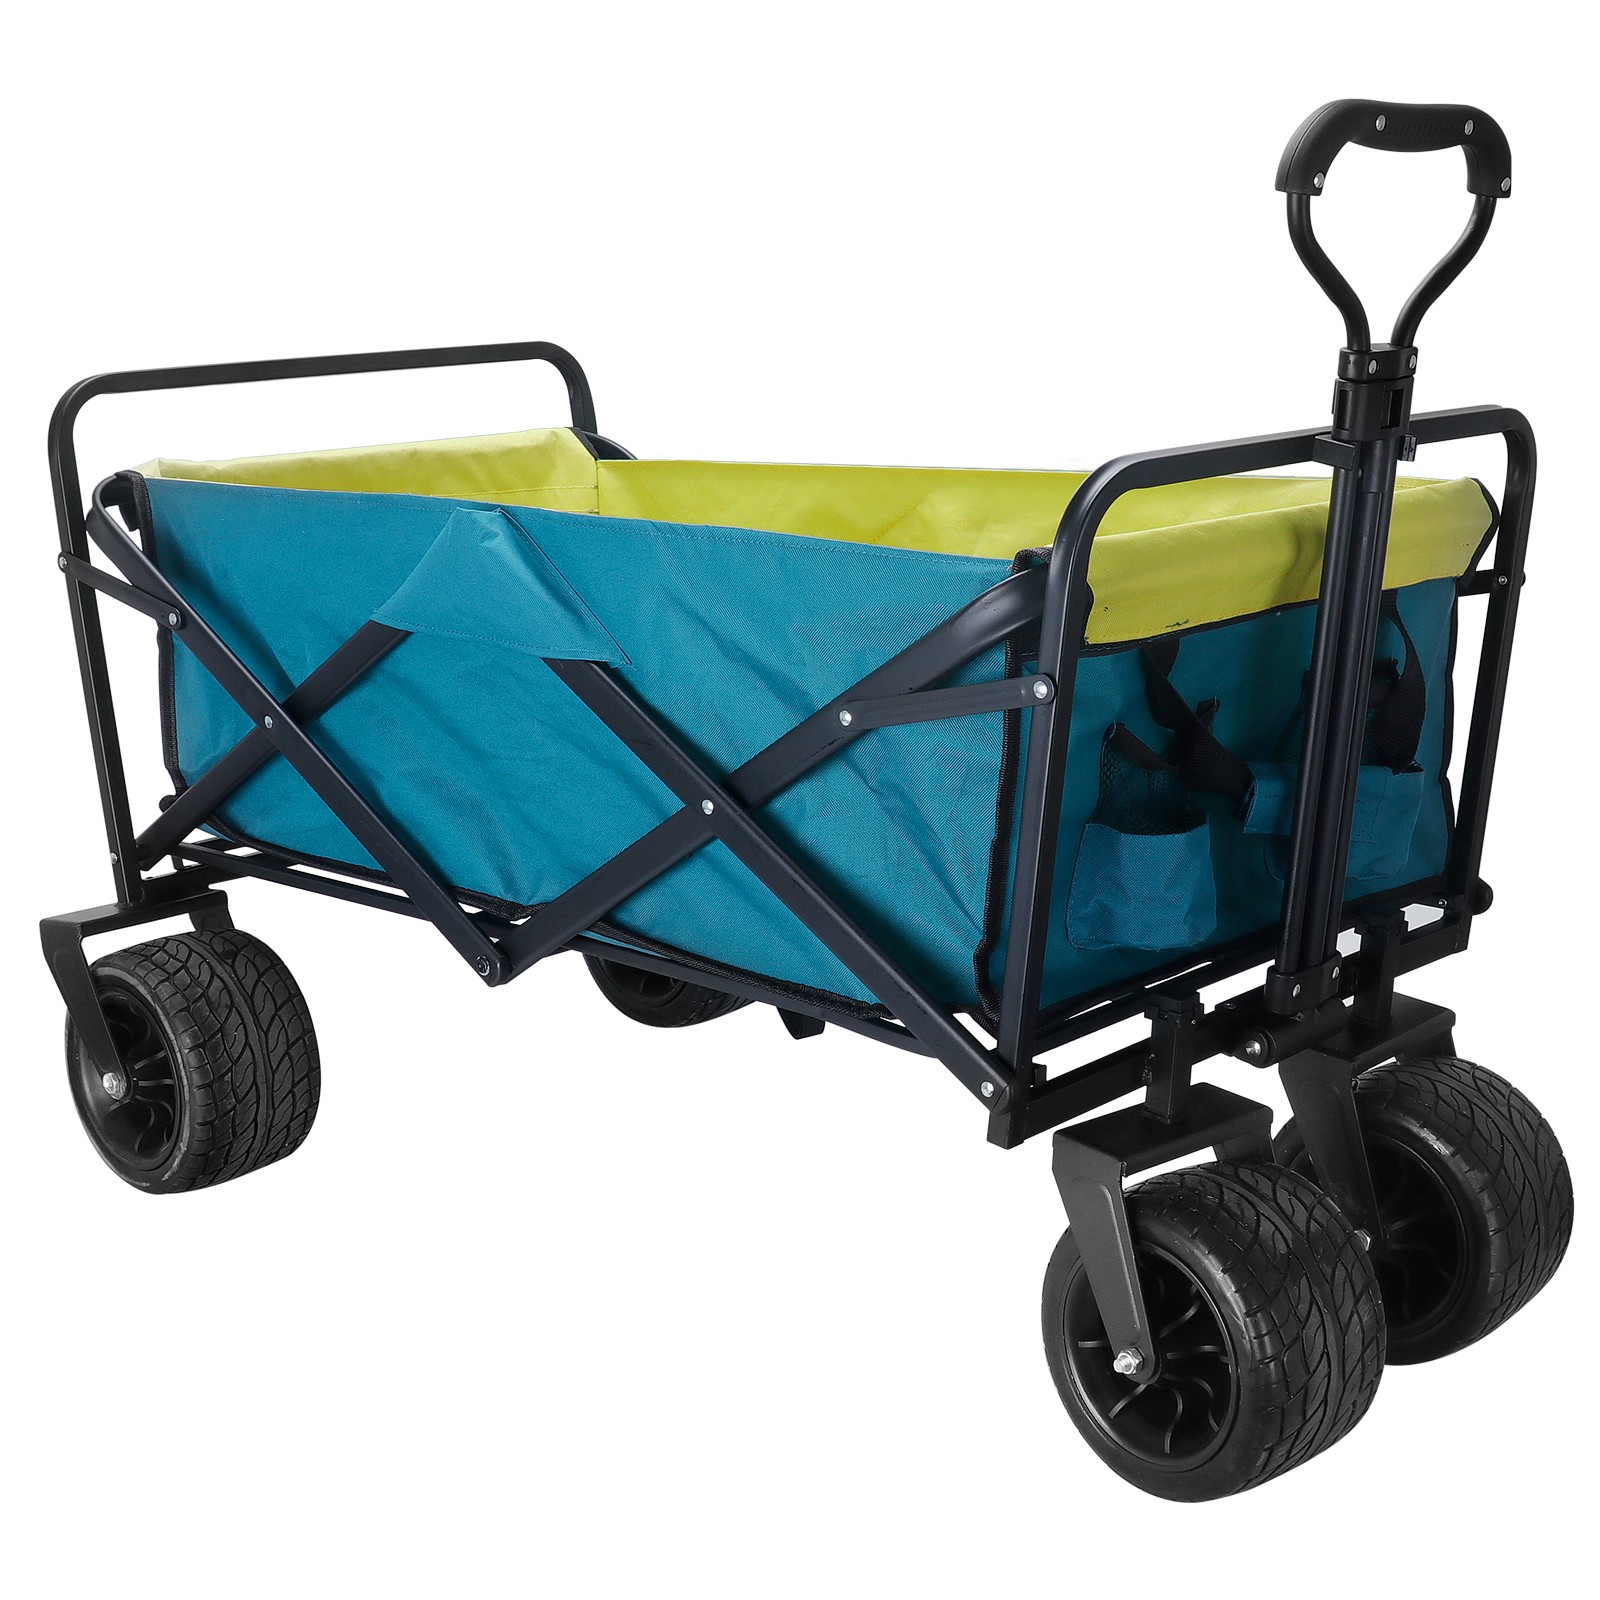 Wagon Garden Shopping Beach Cart with Seat Belt and Big Wheels - Blue Fabric (Fedex Pickup Only)-Boyel Living